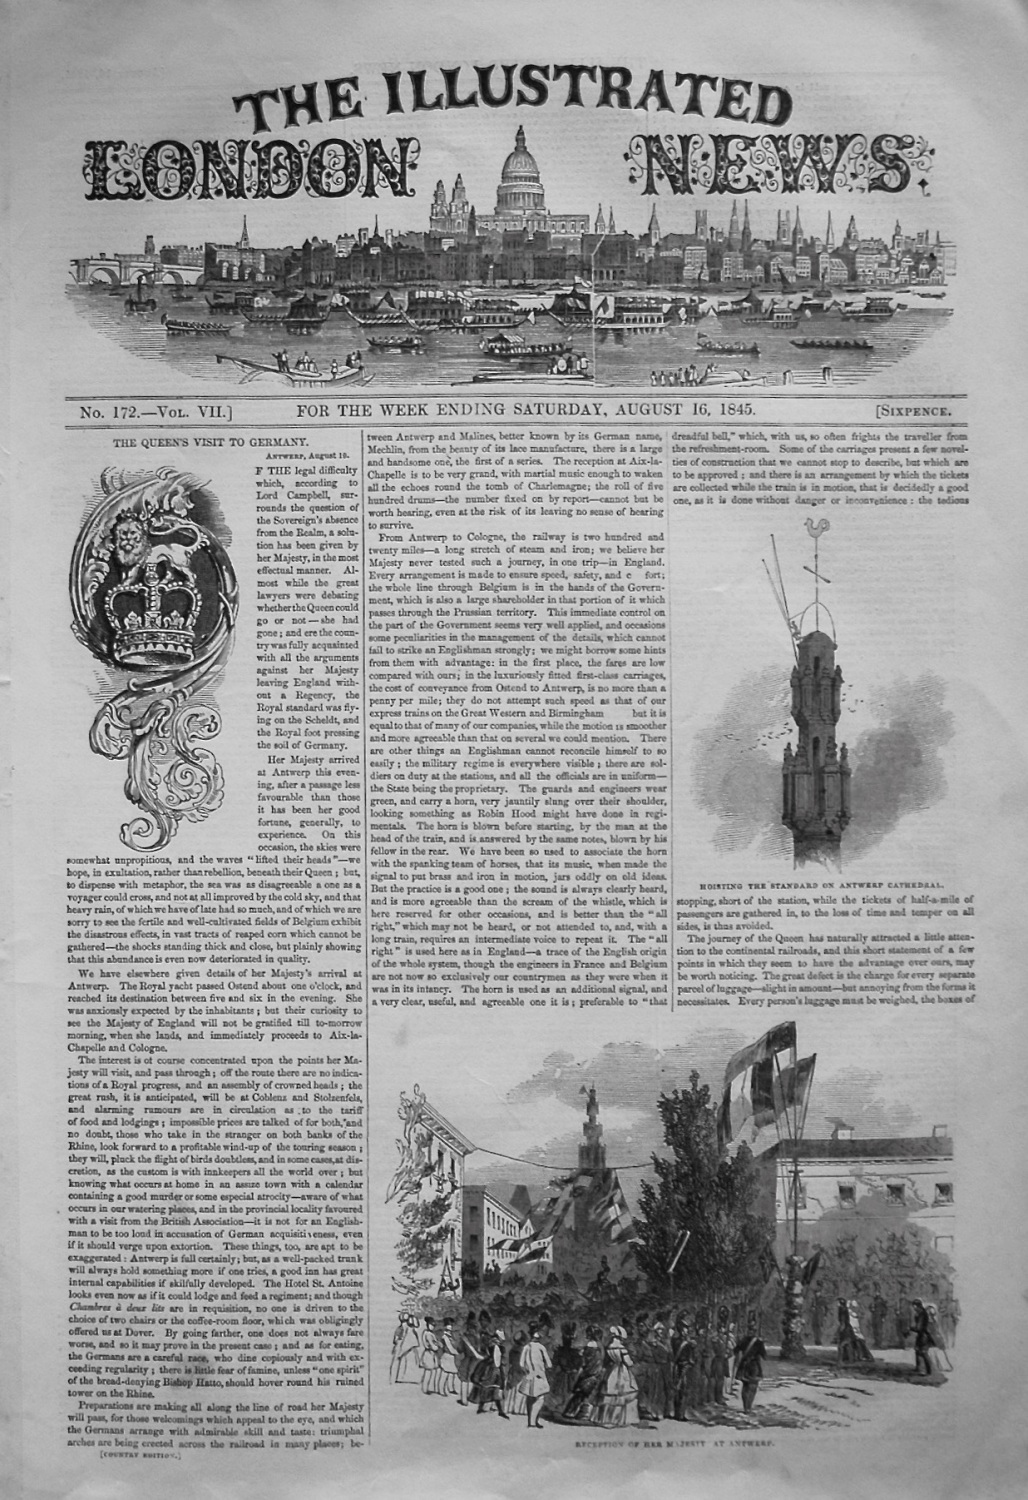 Illustrated London News. August 16th, 1845.